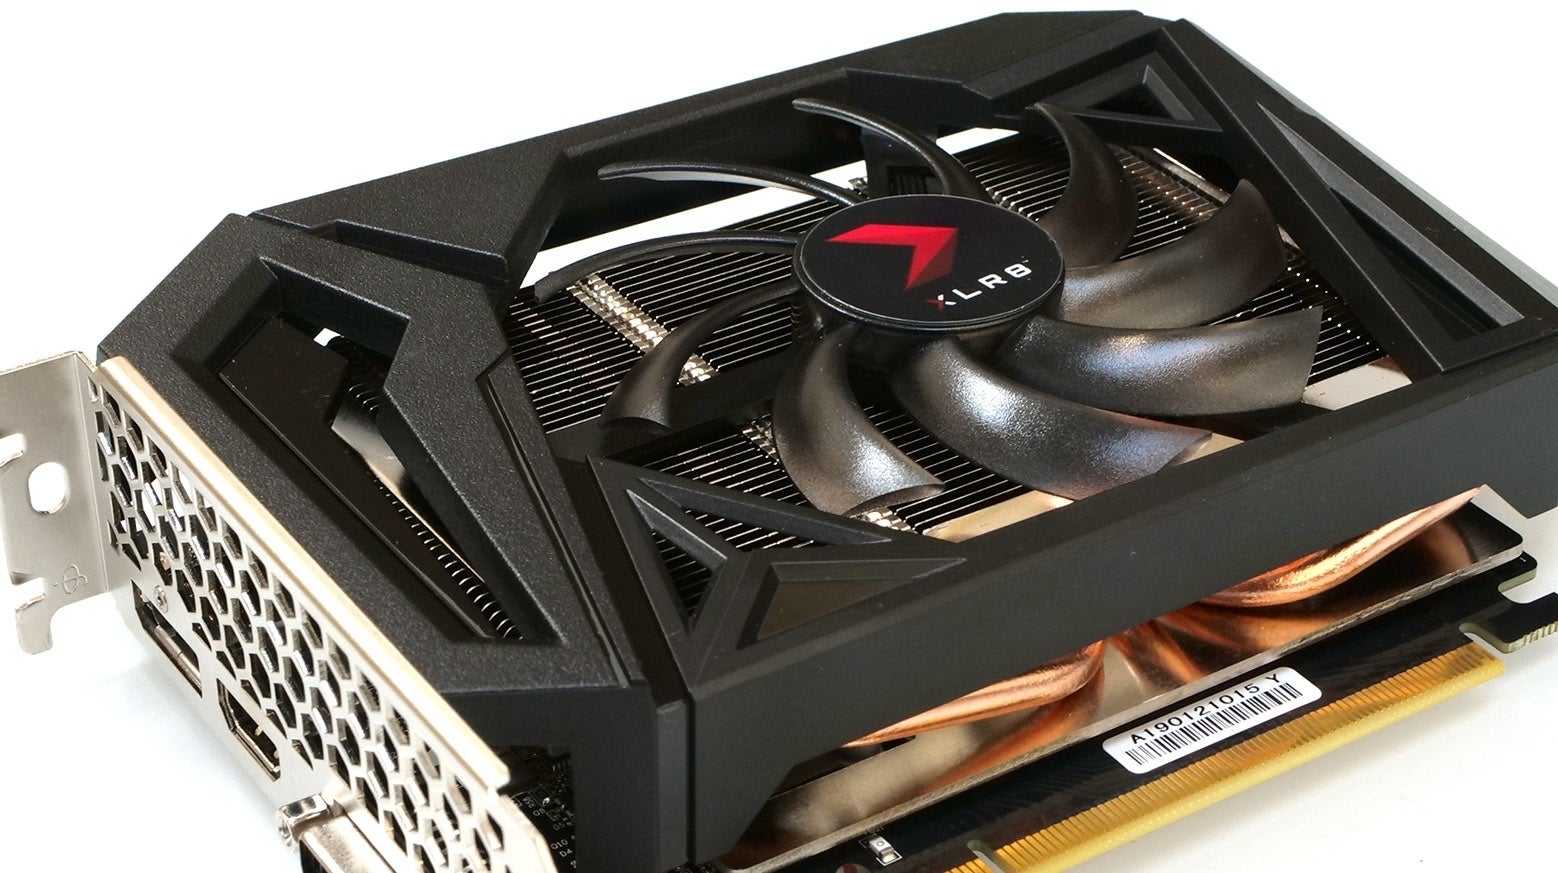 Nvidia GeForce GTX review: the new 1080p champion? |